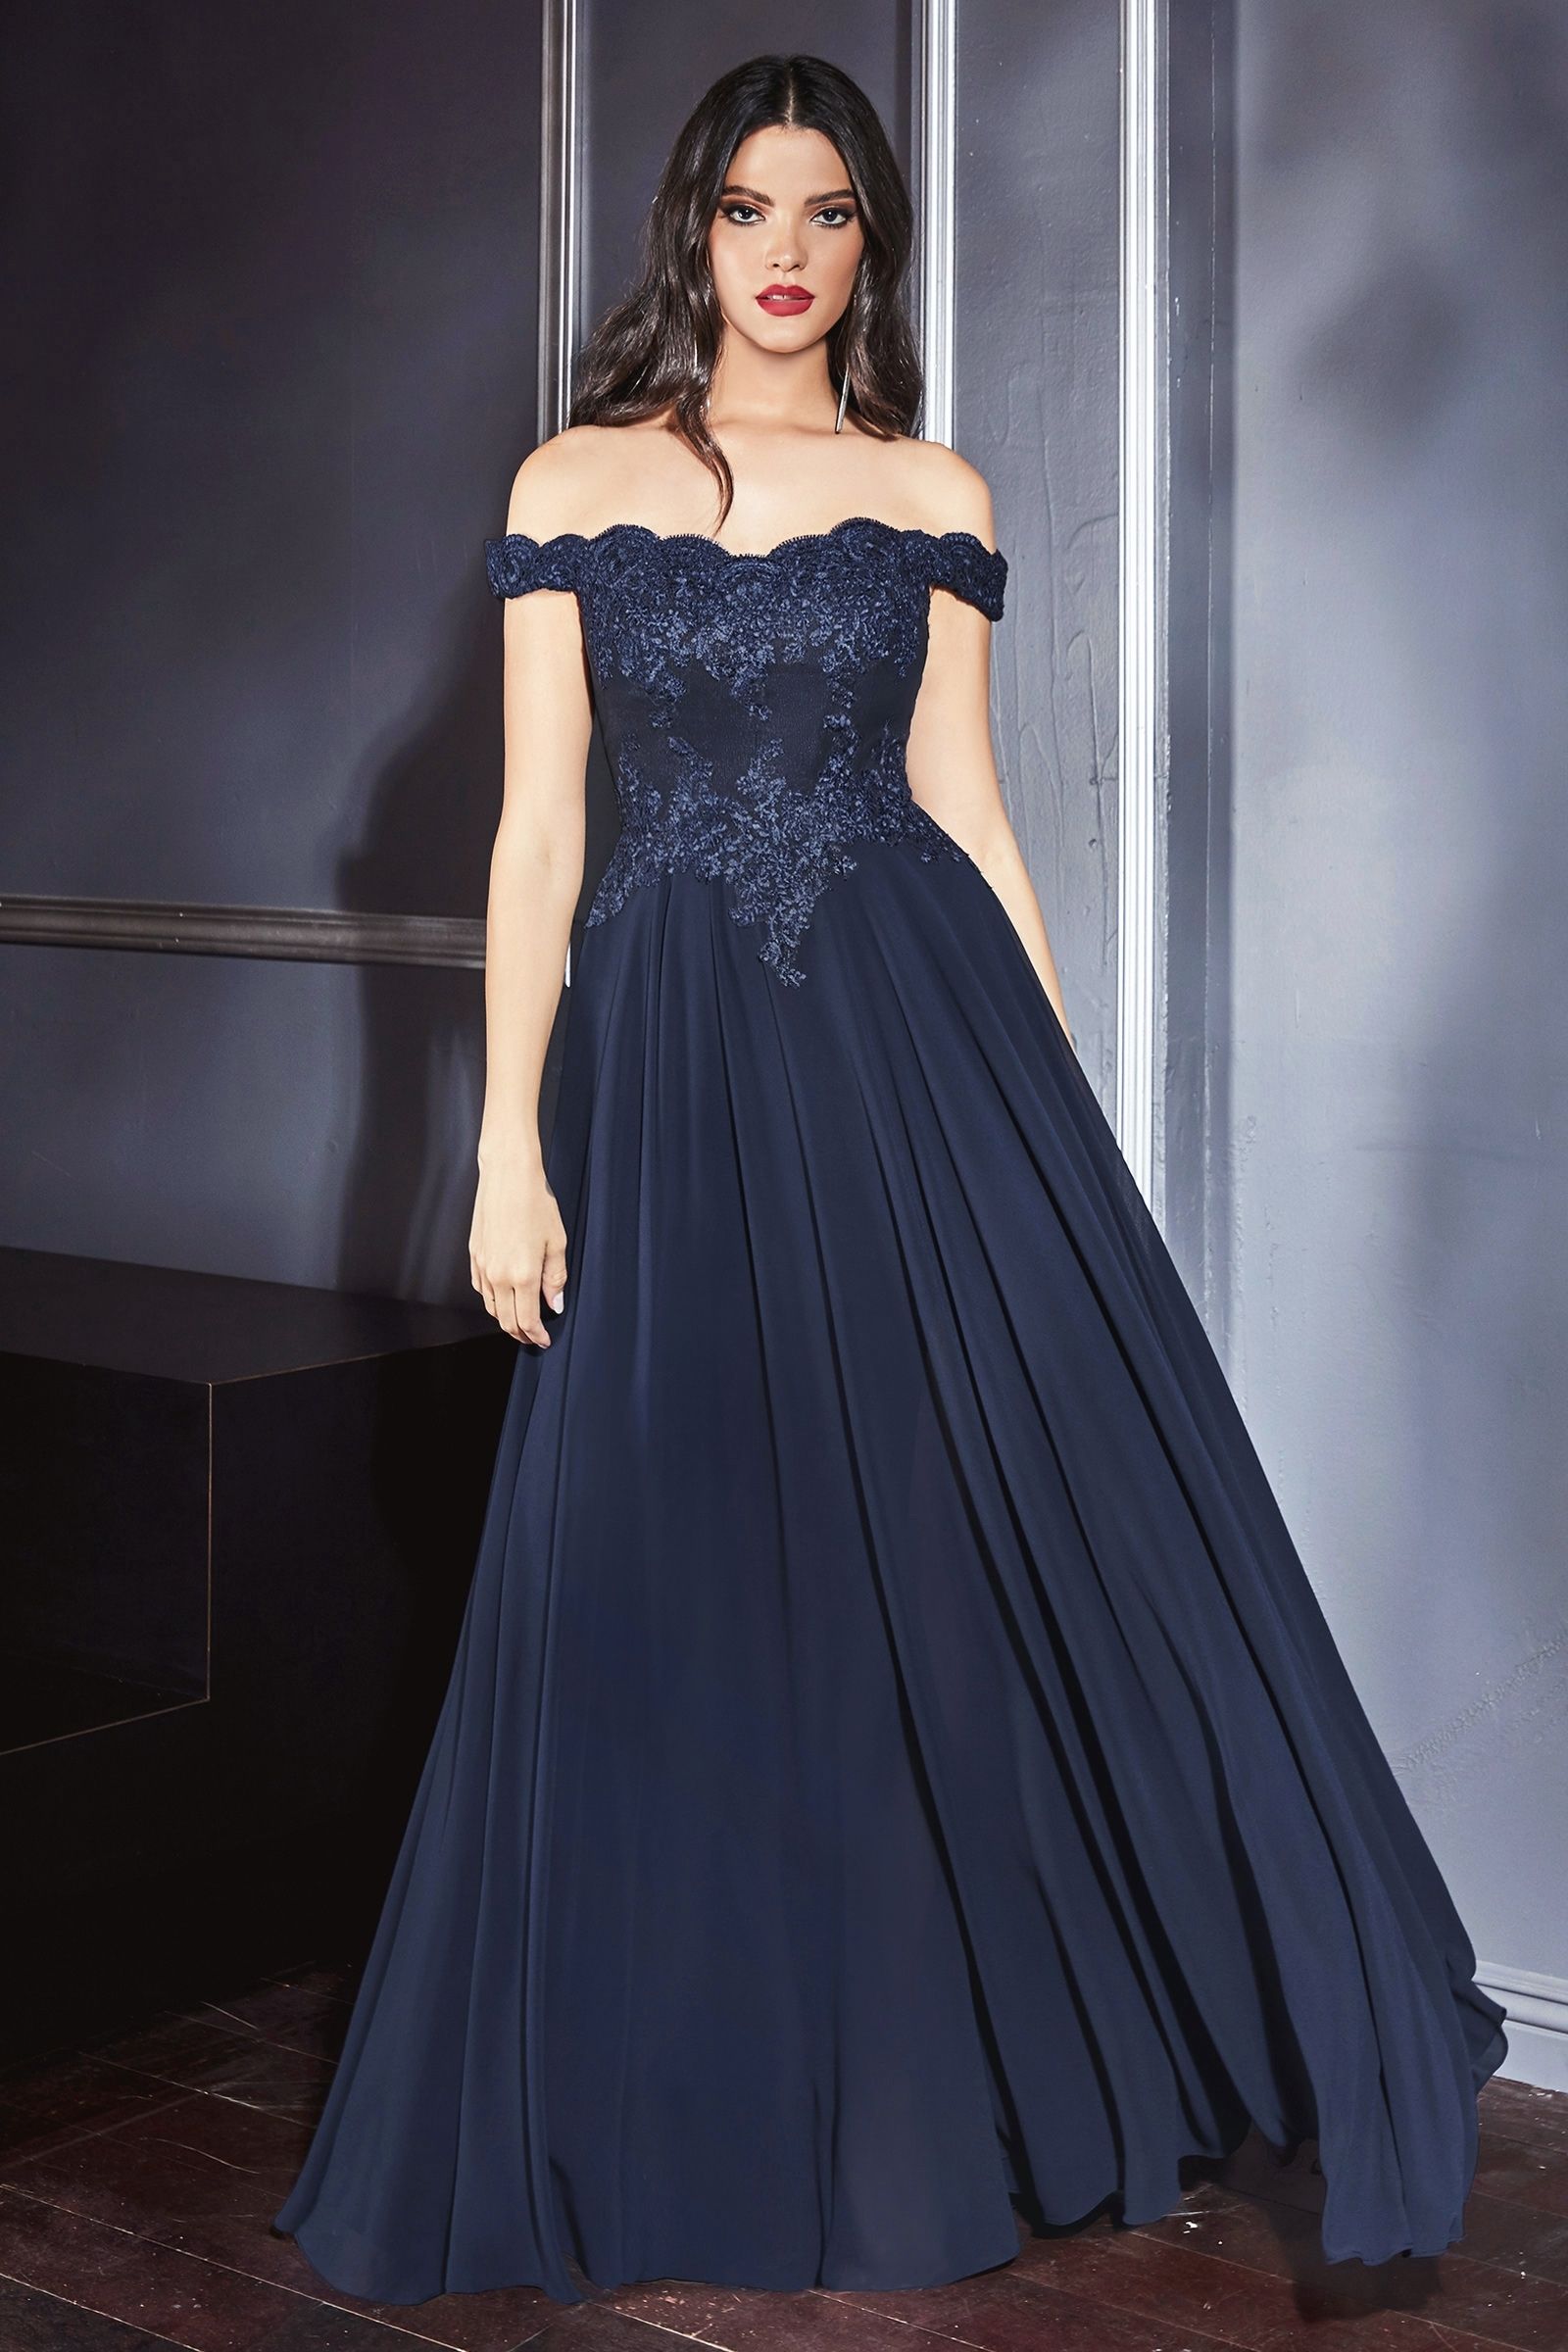 Off-shoulder lace-bodice gown with chiffon skirt & leg slit-smcdress